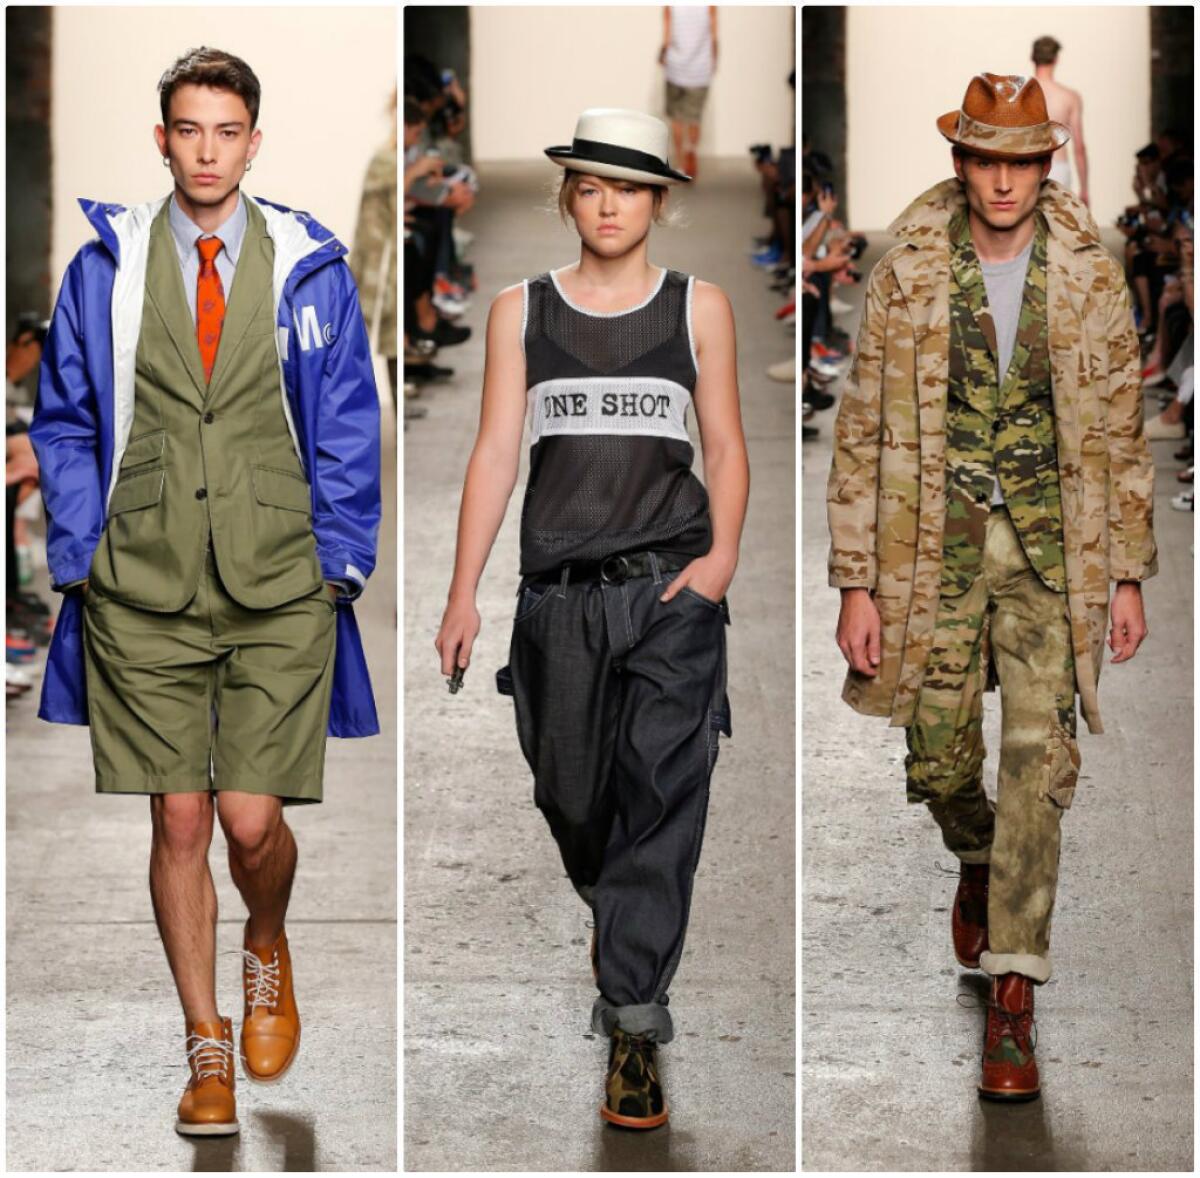 Looks from the spring 2014 Mark McNairy New Amsterdam men's and women's runway show held during New York Fashion Week.